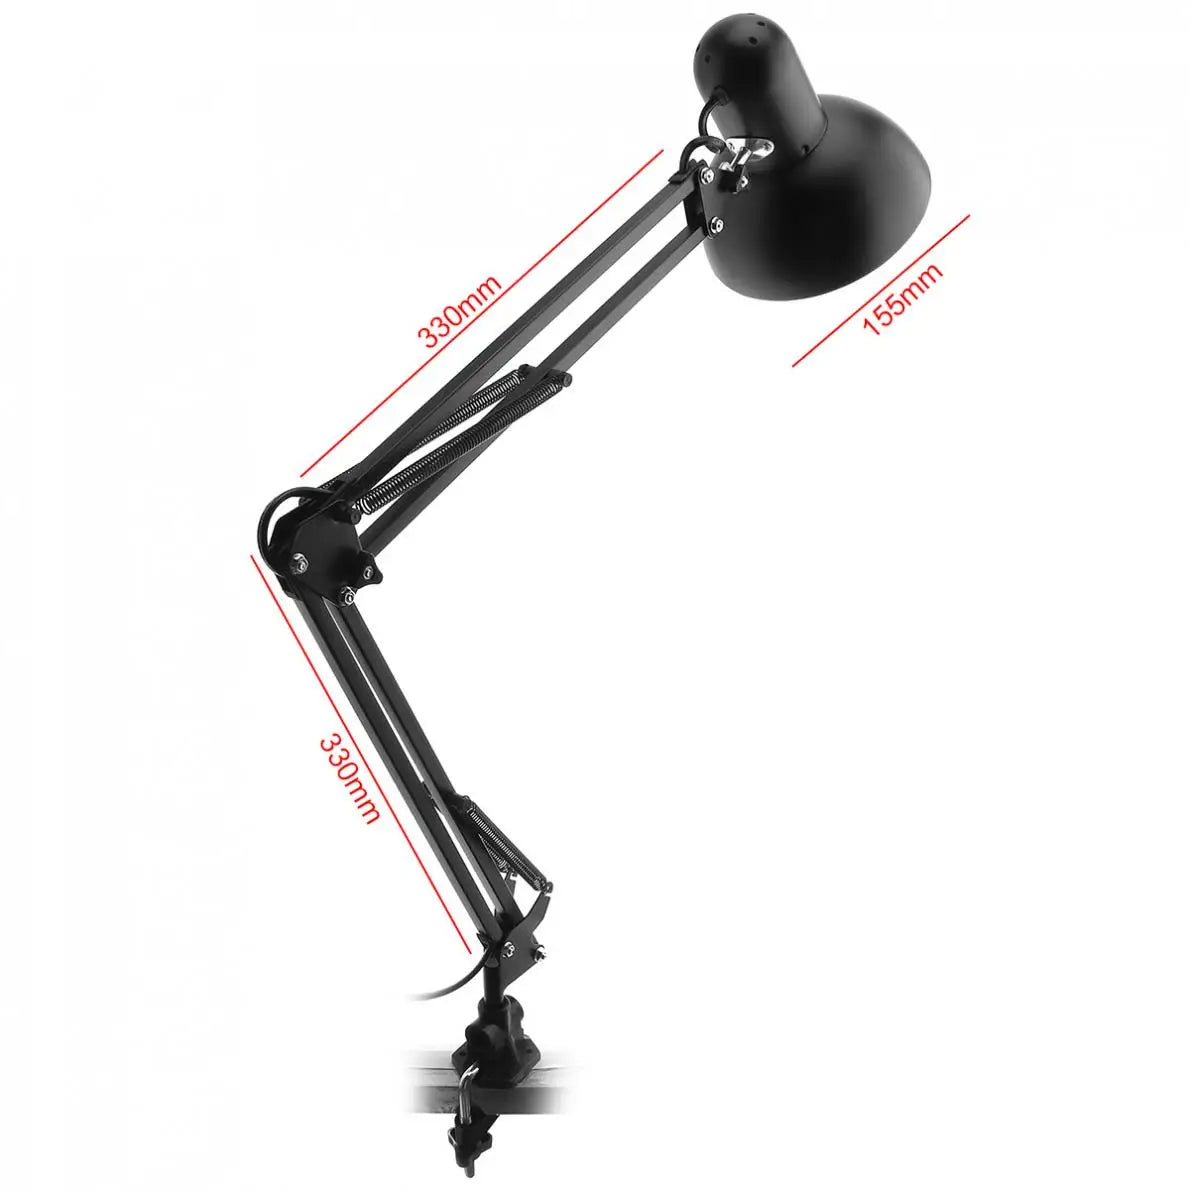 Home Desk Lamp Flexible Swing Arm E27 Desk Light Bracket with Rotatable Table Lamp Head and Clamp Mount Support for Office Study